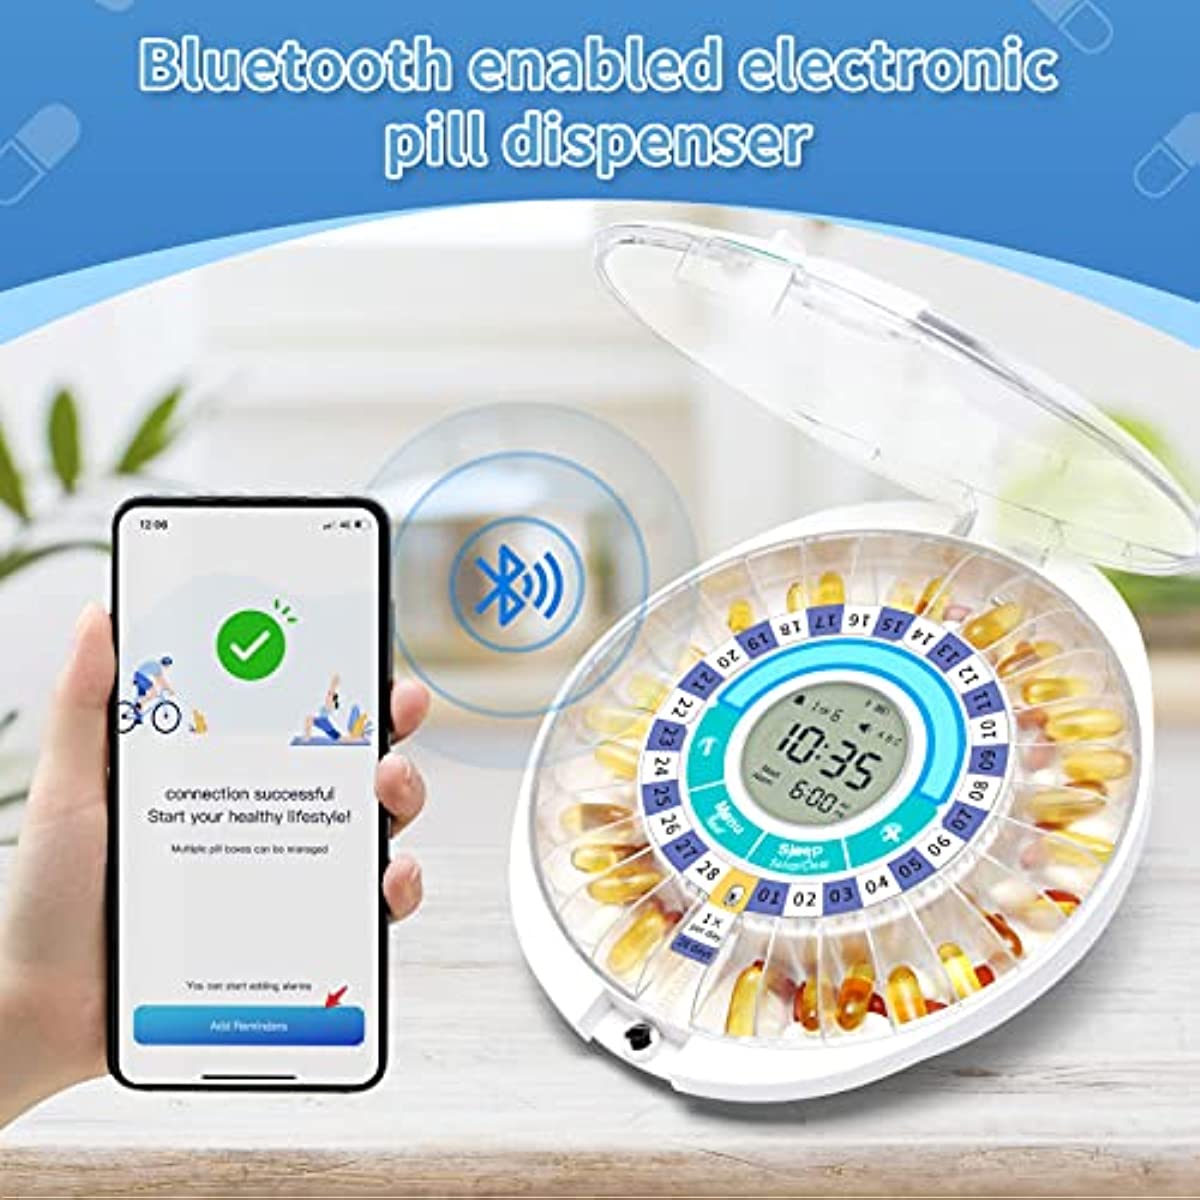 Automatic Pill Dispenser Machine with Alarm, Electronic Timed Medication Dispenser for Elderly, 28 Day Bluetooth Smart Pill Organizer via Sounds Reminder, Light, App Alerts, Ideal Gift for Family